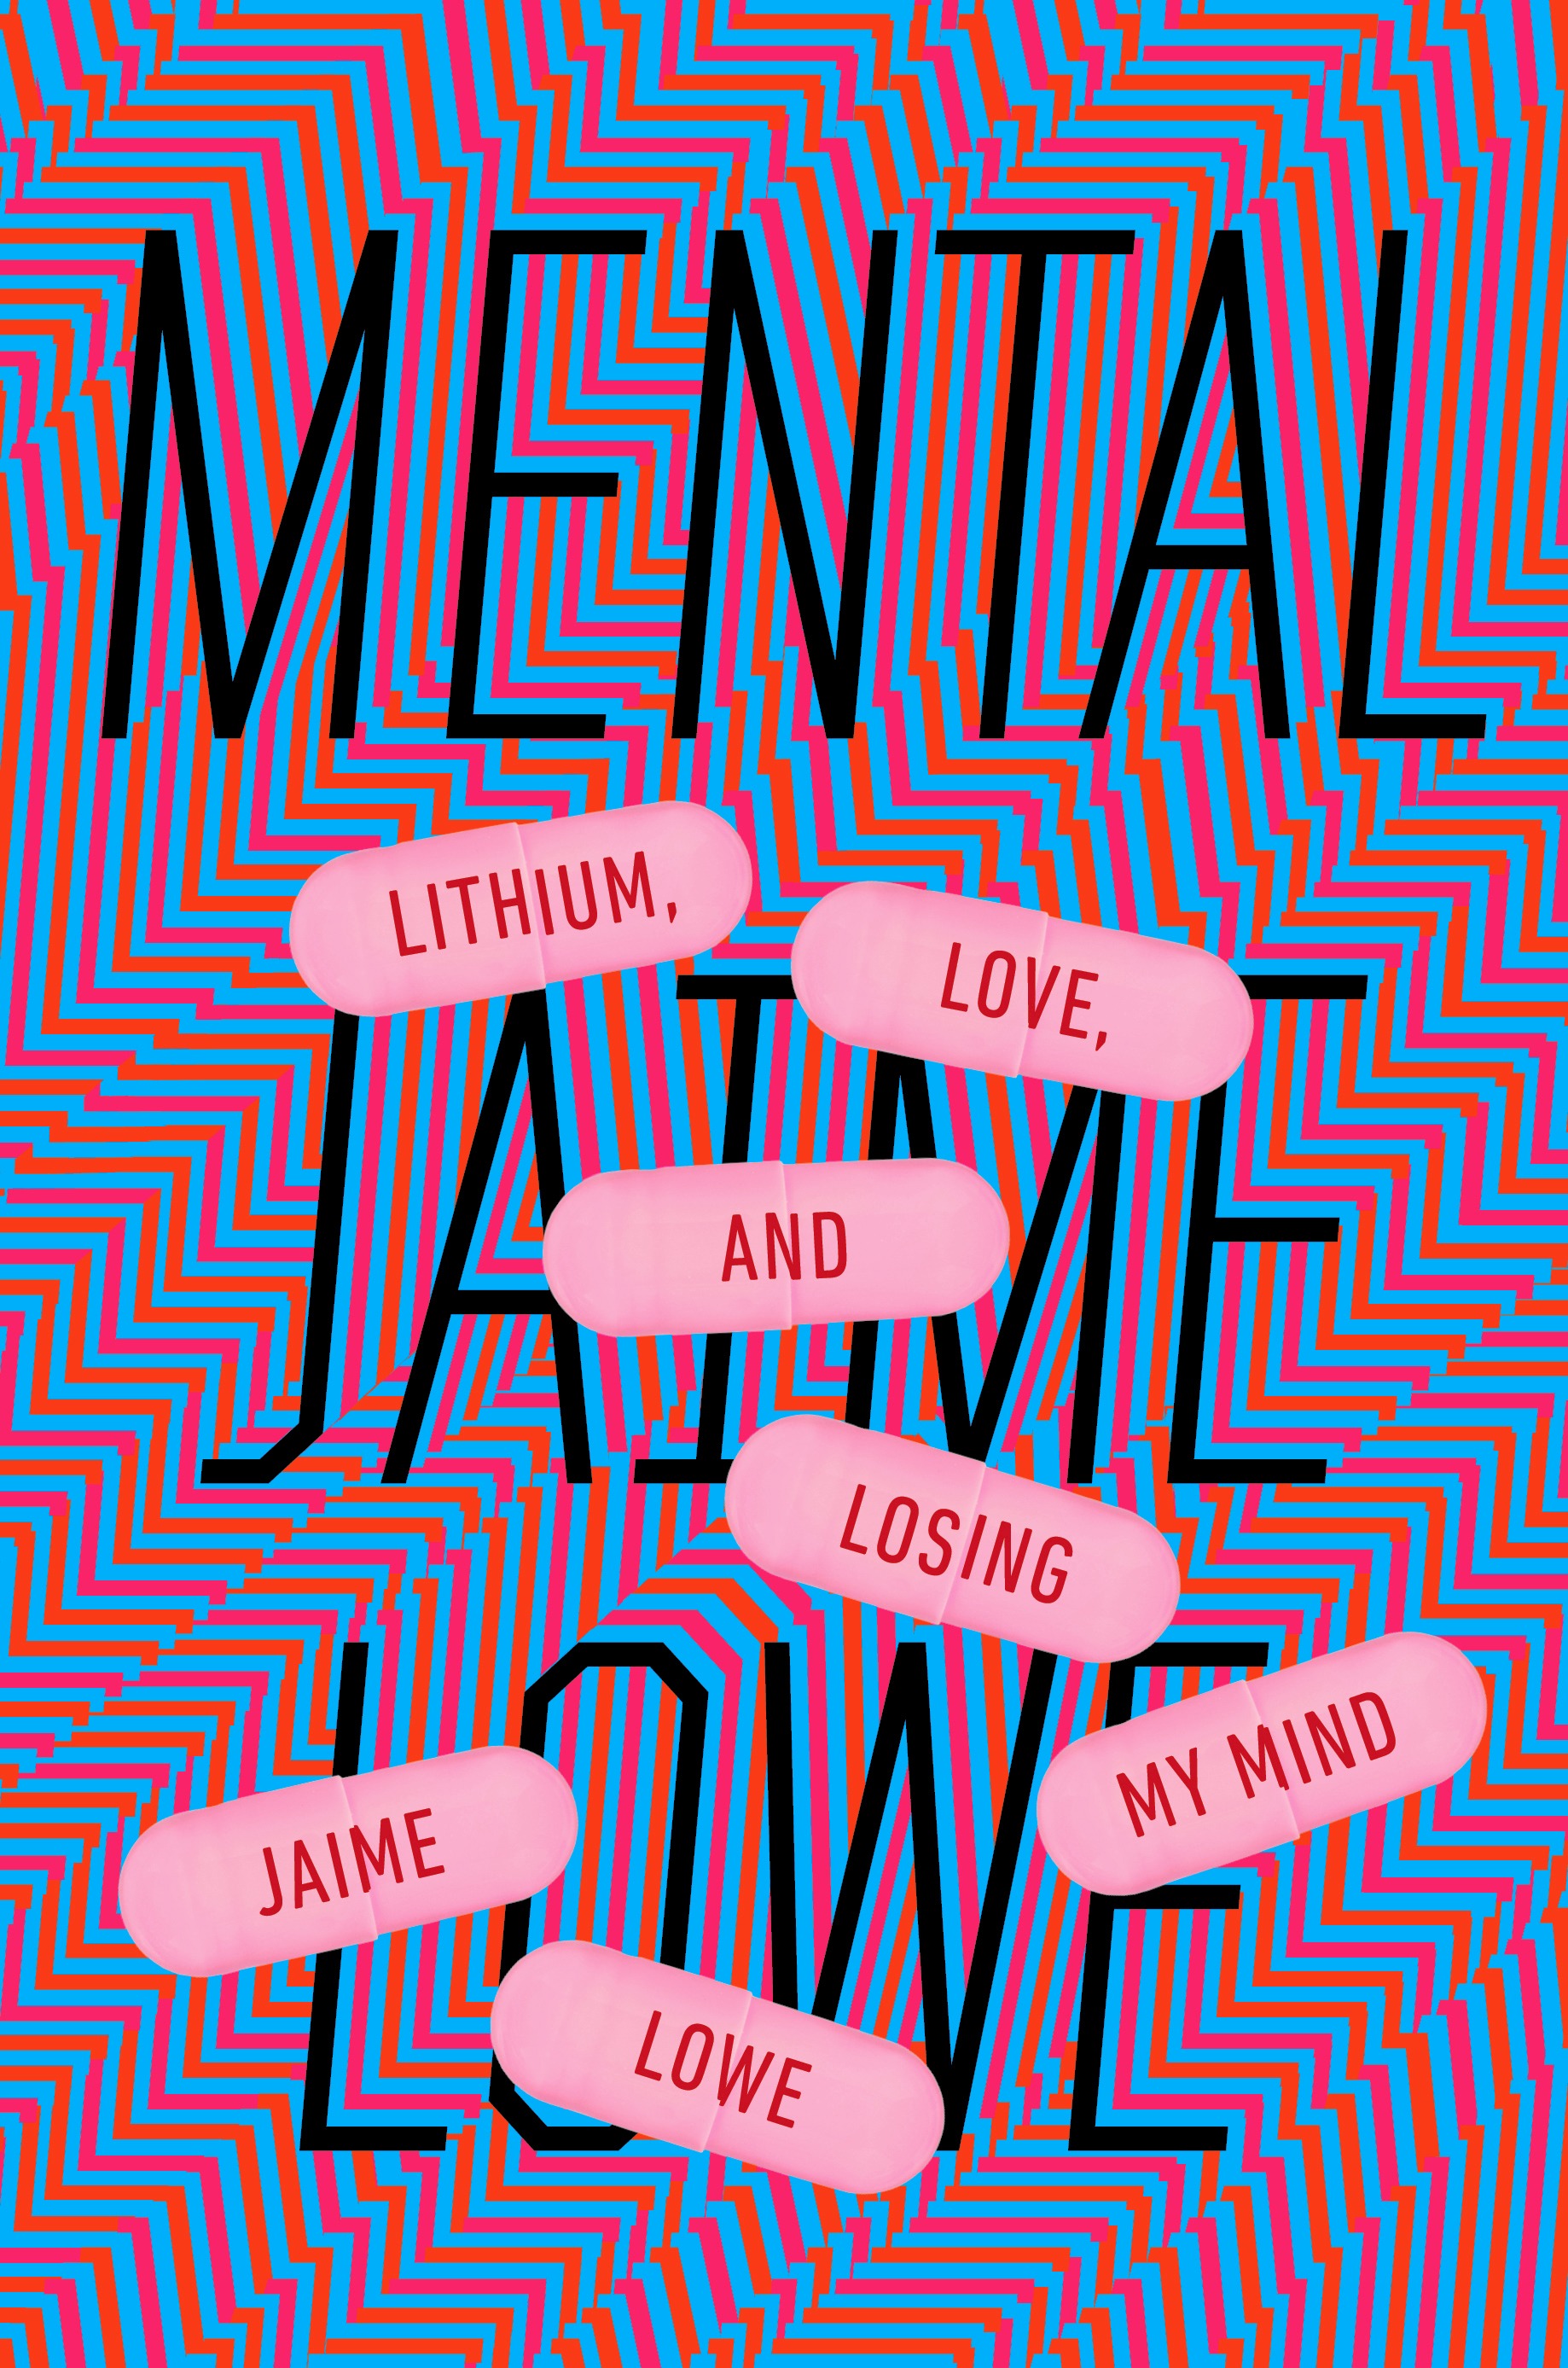 Book Launch: Mental: Lithium, Love, and Losing My Mind by Jaime Lowe — in conversation w/ Caity Weaver